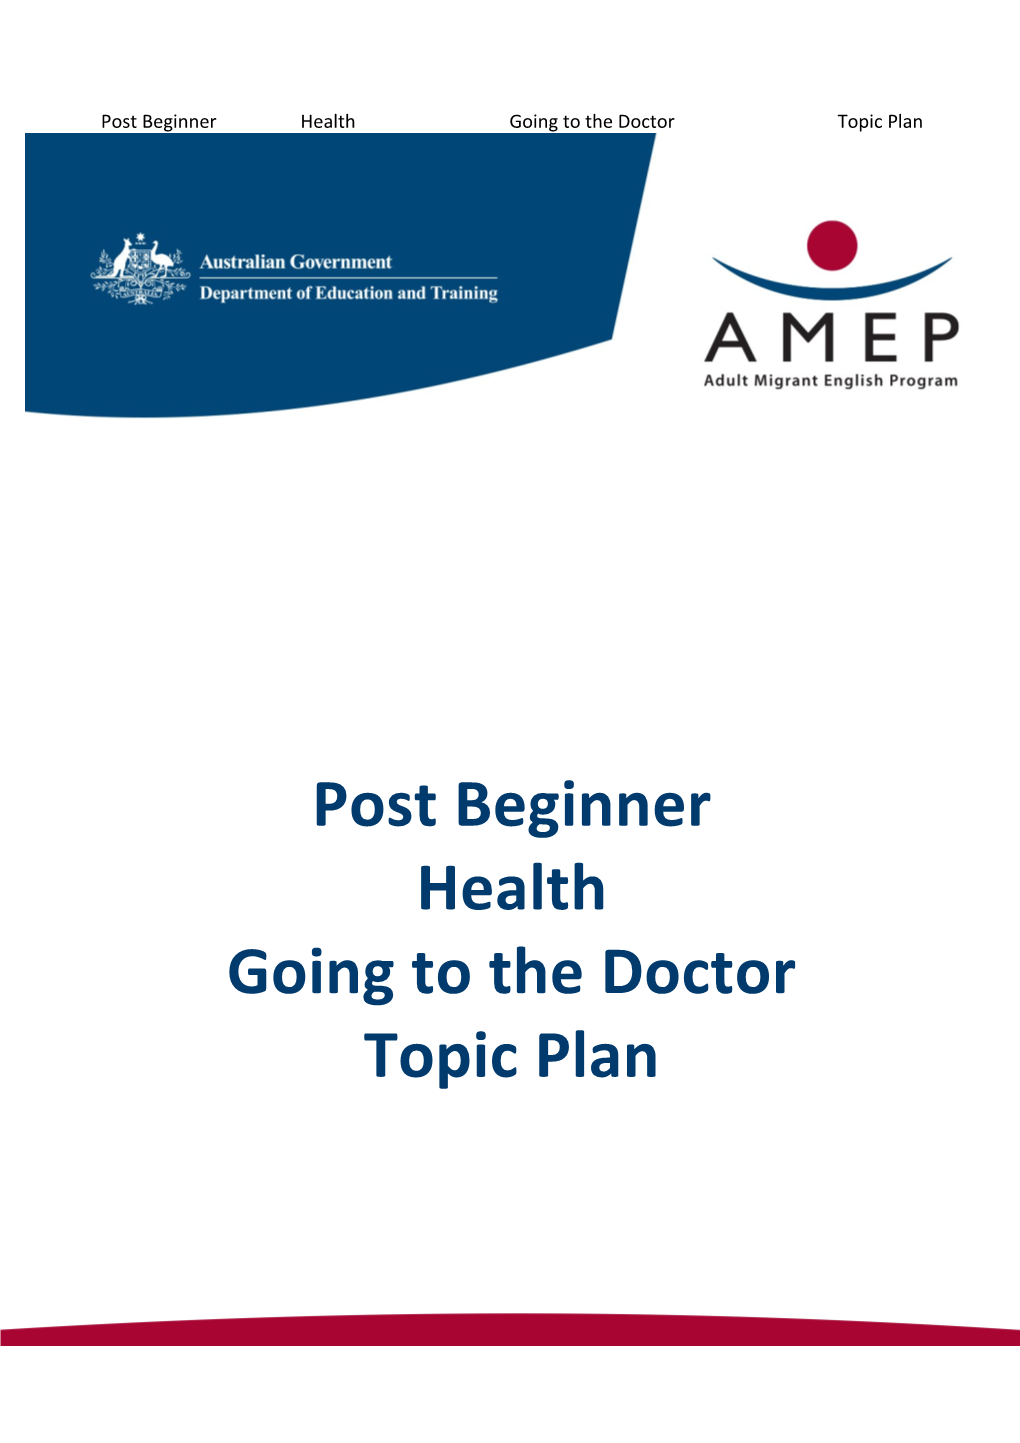 Post Beginner Health Going to the Doctor Topic Plan